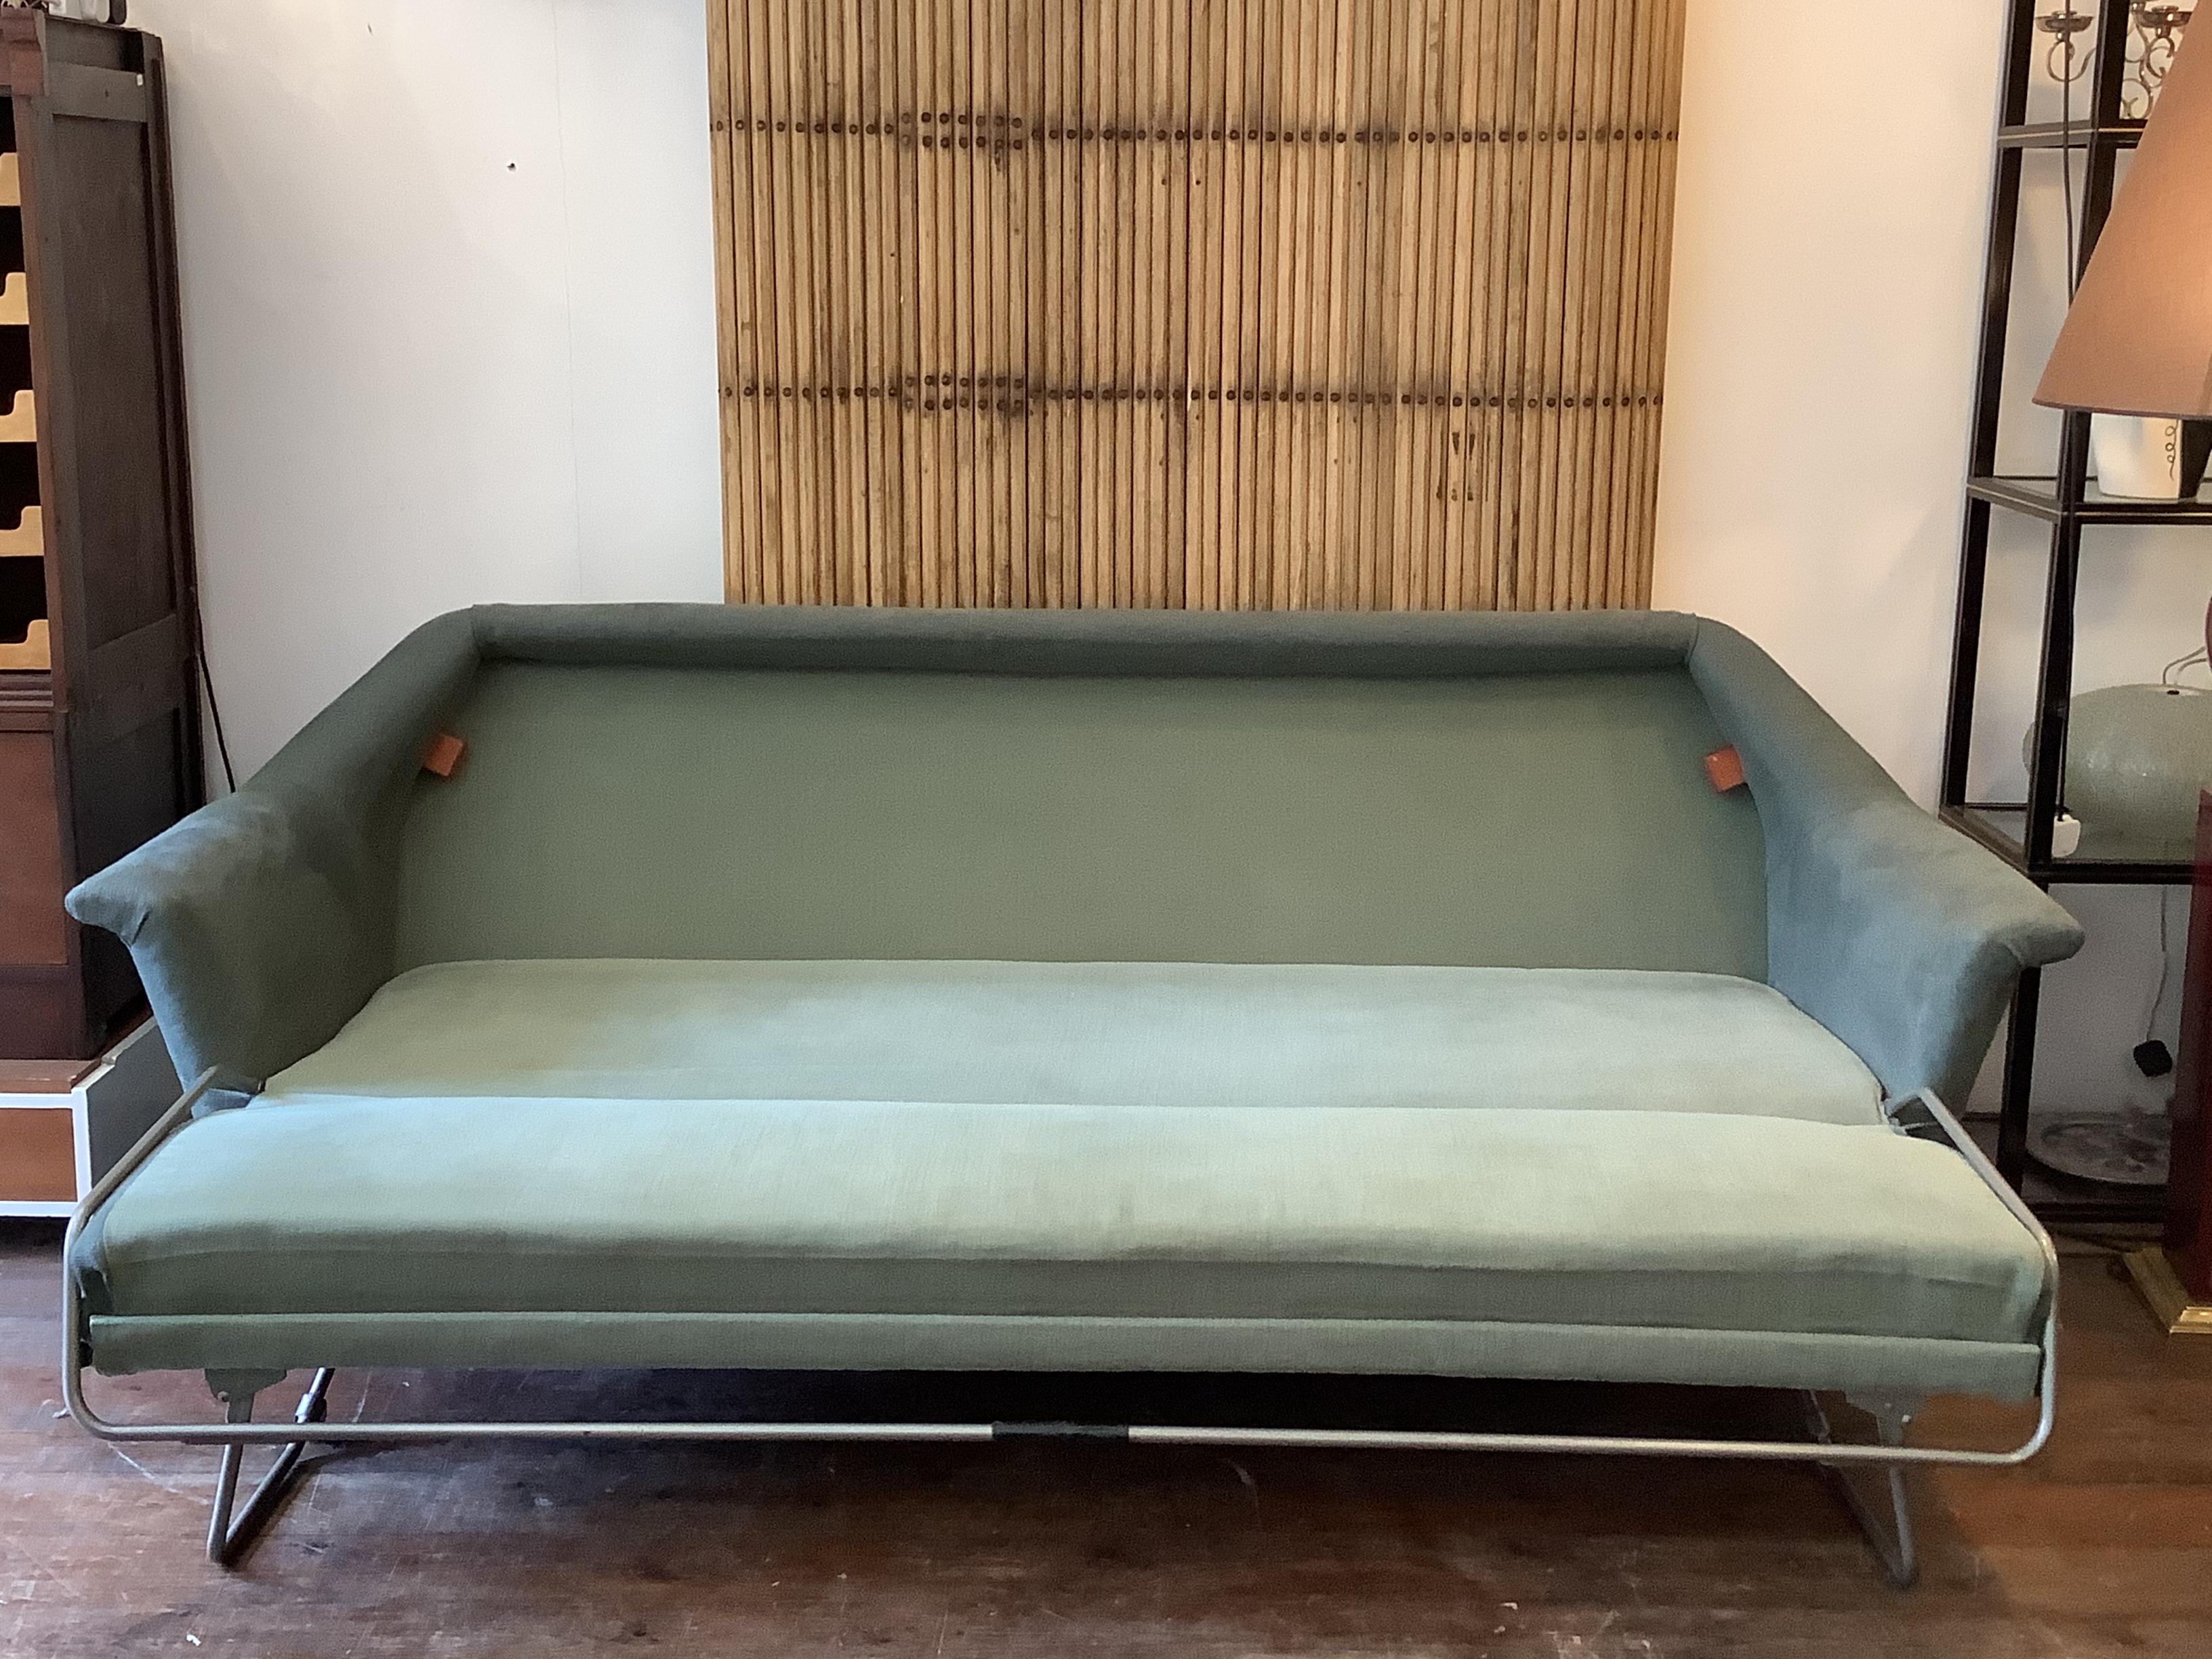 Greaves and Thomas produced this beautiful lines and shaped sofabed 
It has been re upholstered in heavy weave soho linen and cotton linen mattress cover
Easily goes from a comfortable sofa into a wonderful useful functional bed..
Classic 